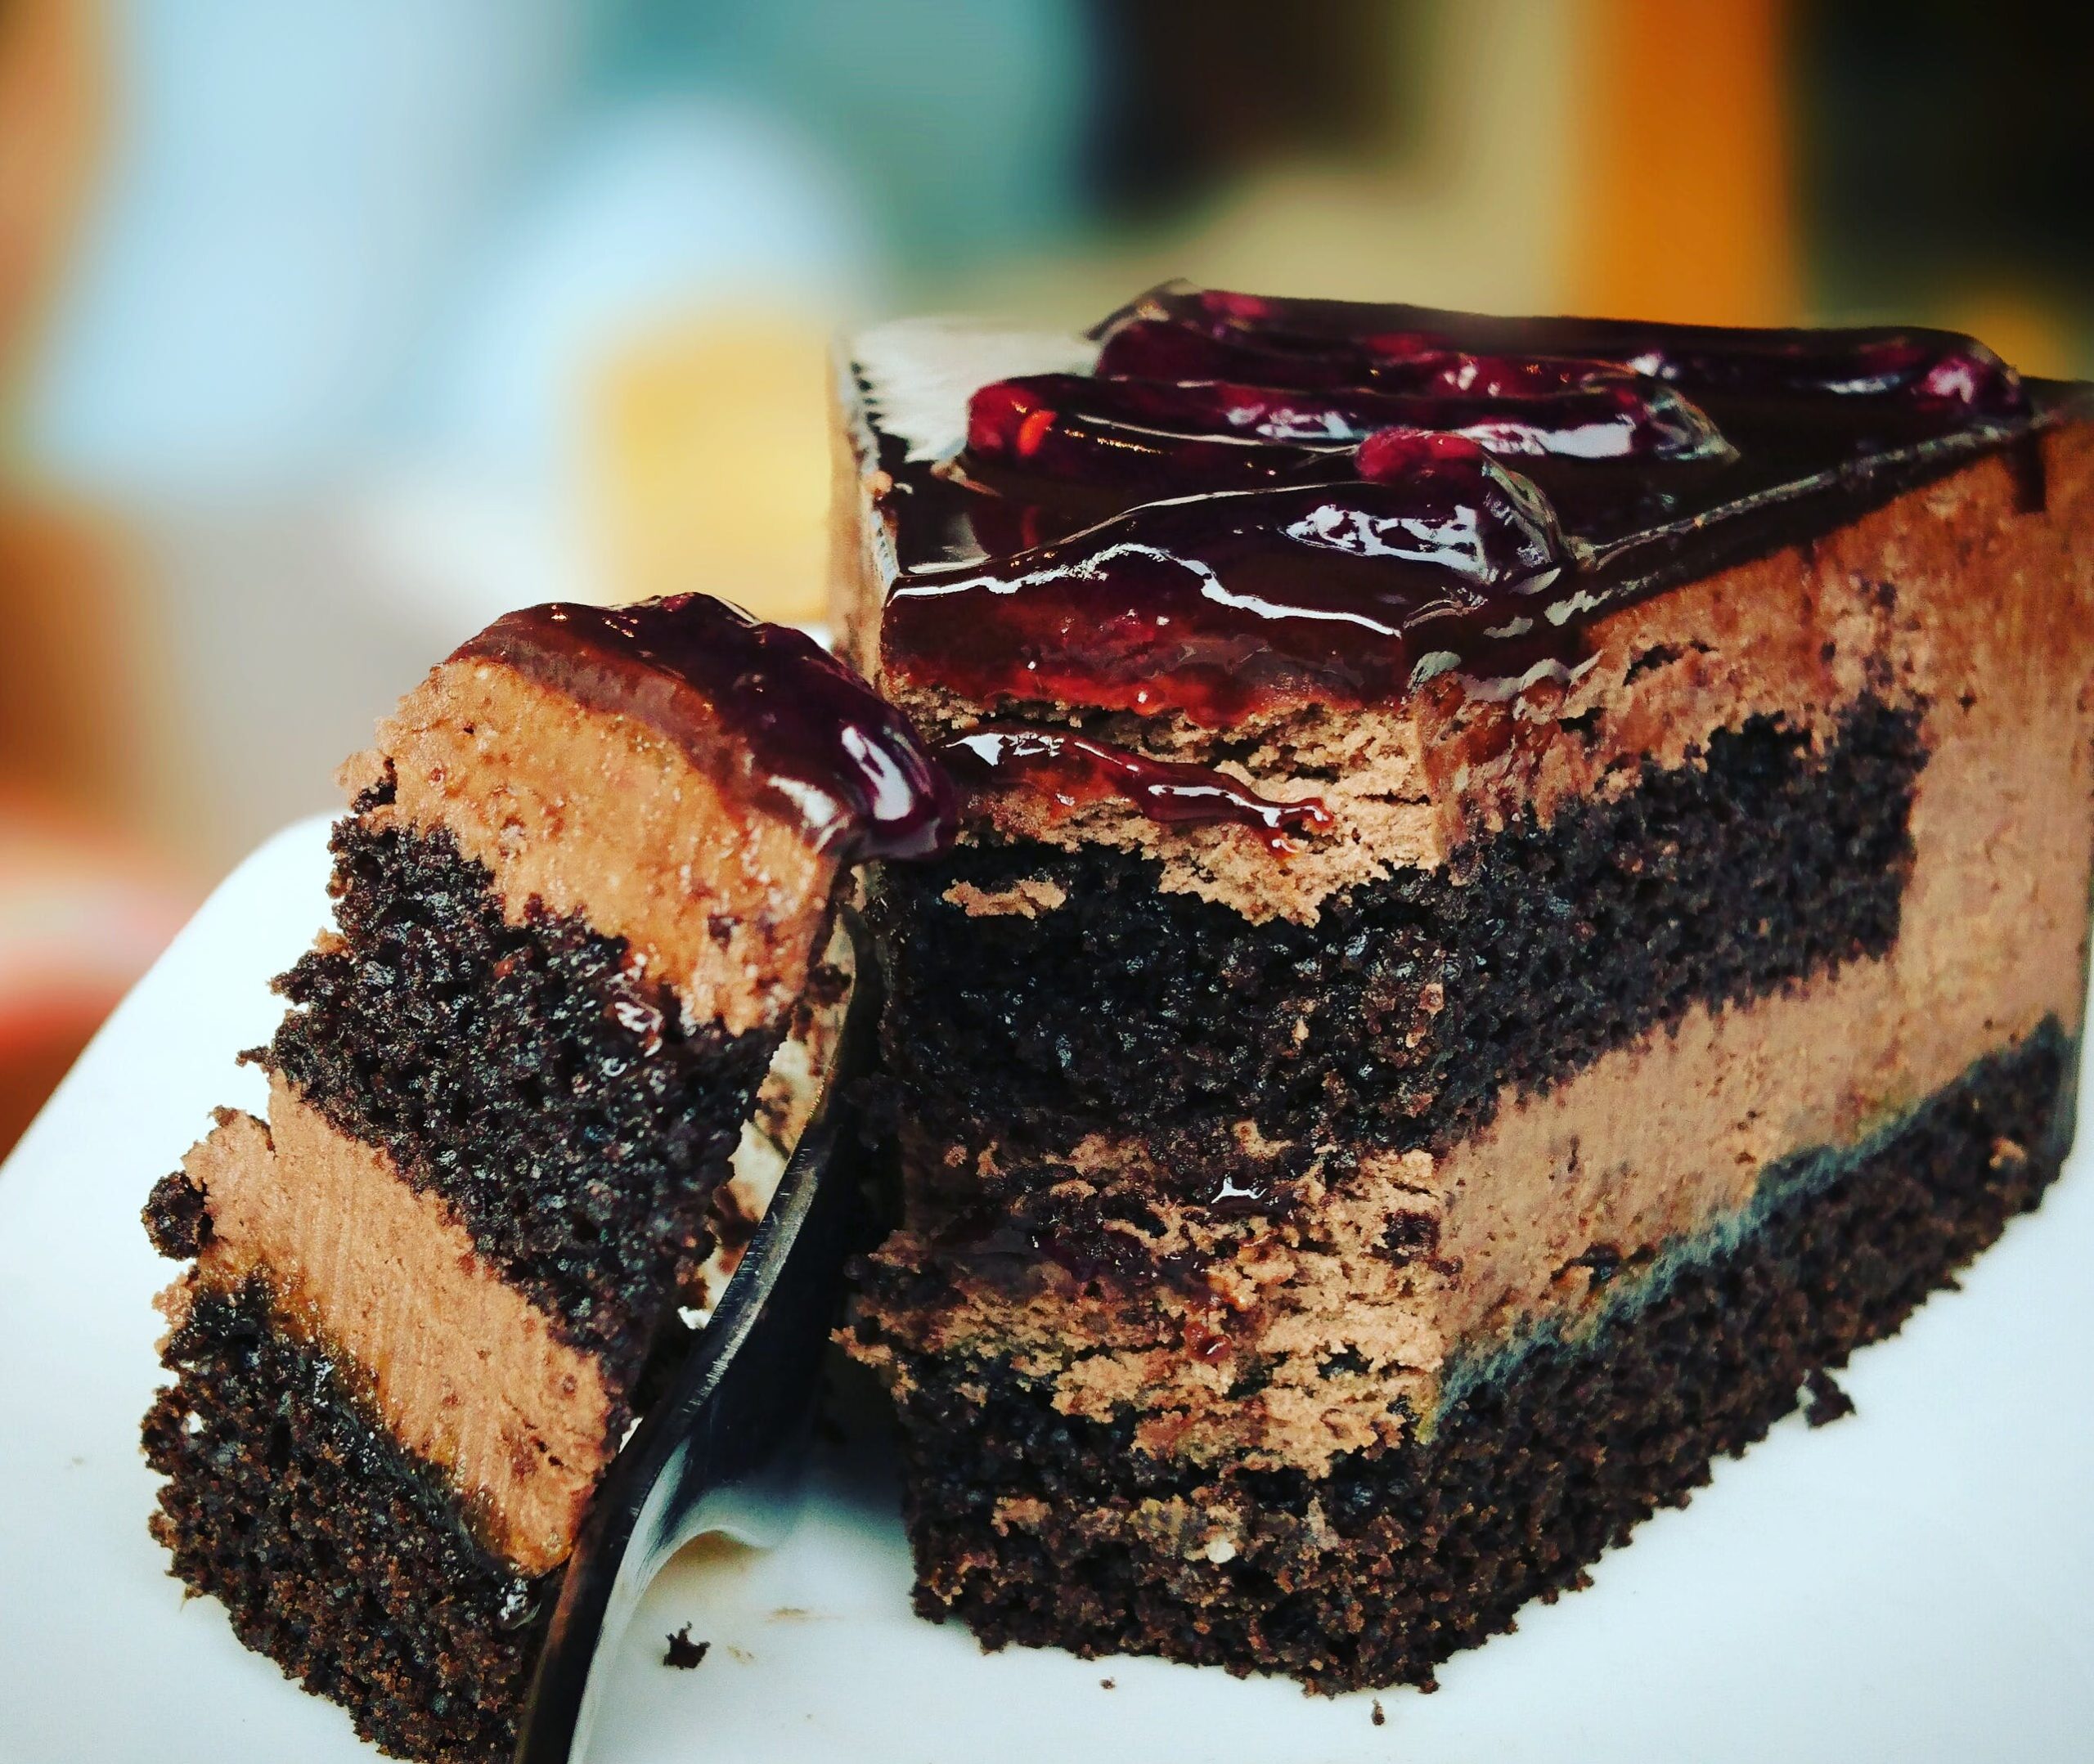 Whats Your Preferred Method For Preparing The Argentinian Dessert, Chocotorta?